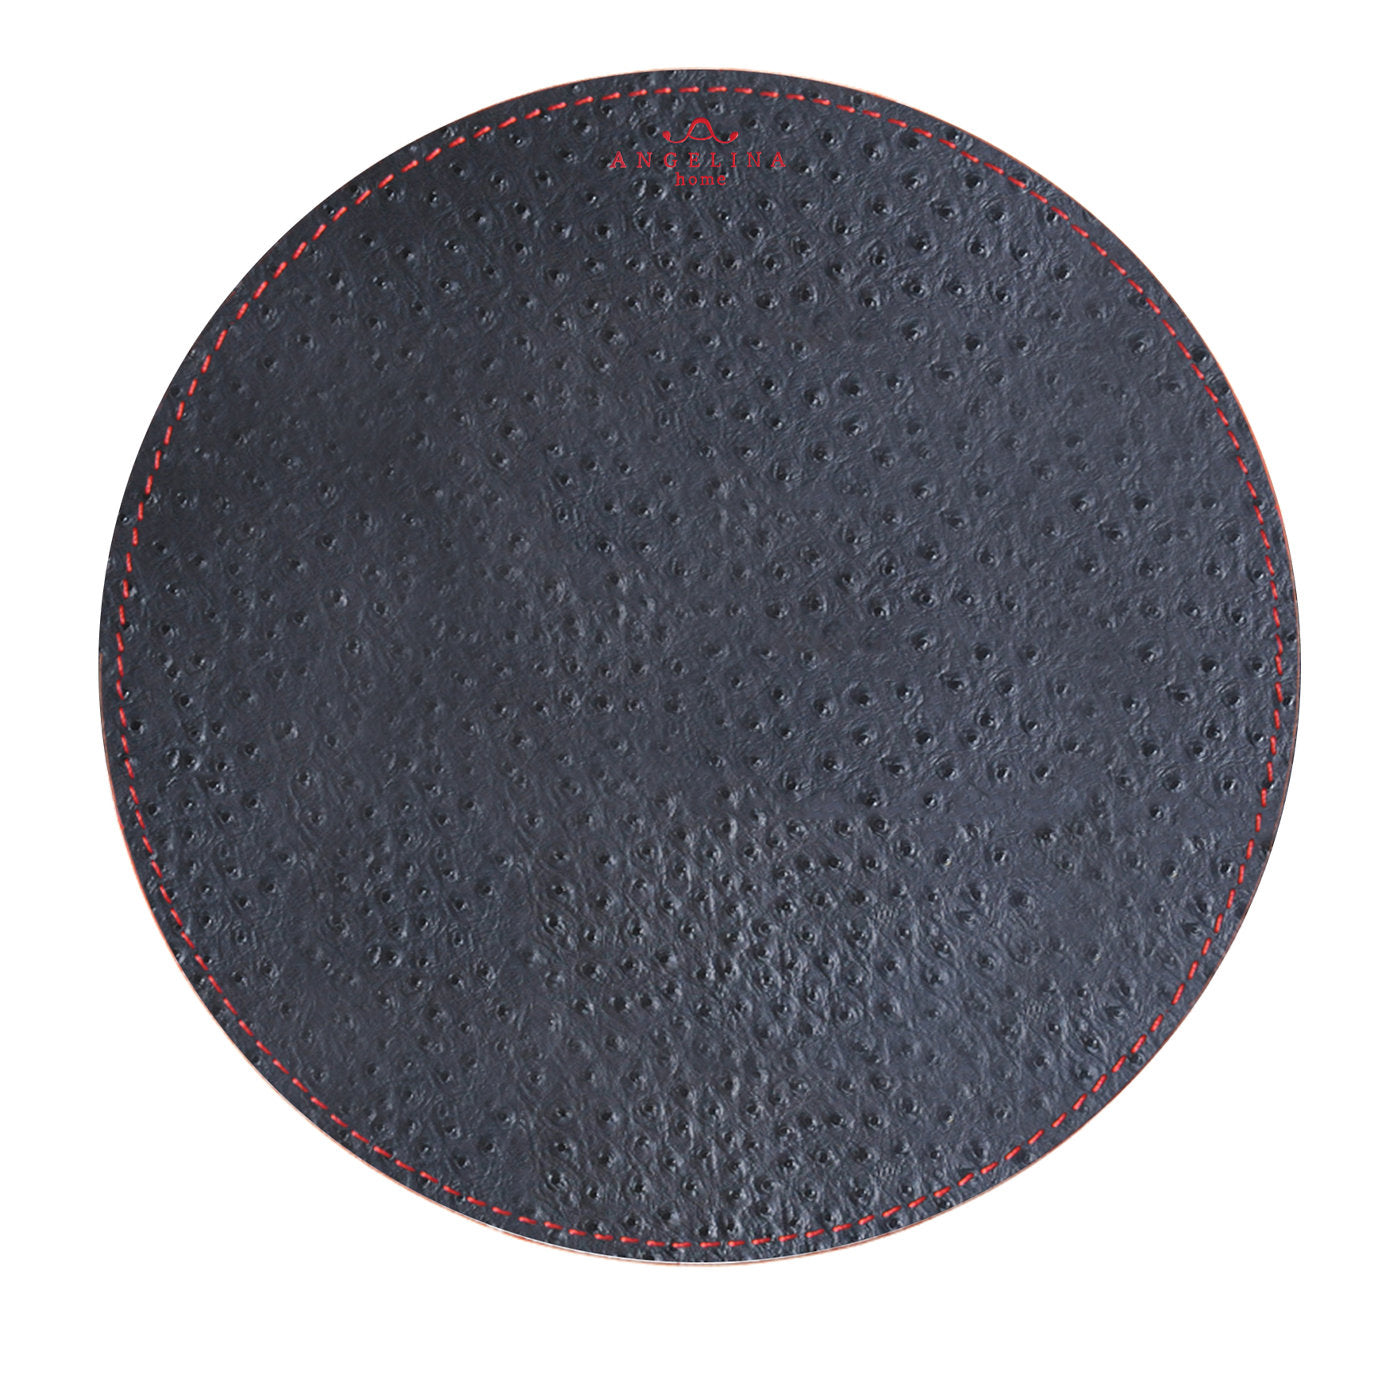 Kenya Small Set of 2 Round Black Leather Placemats - Alternative view 2